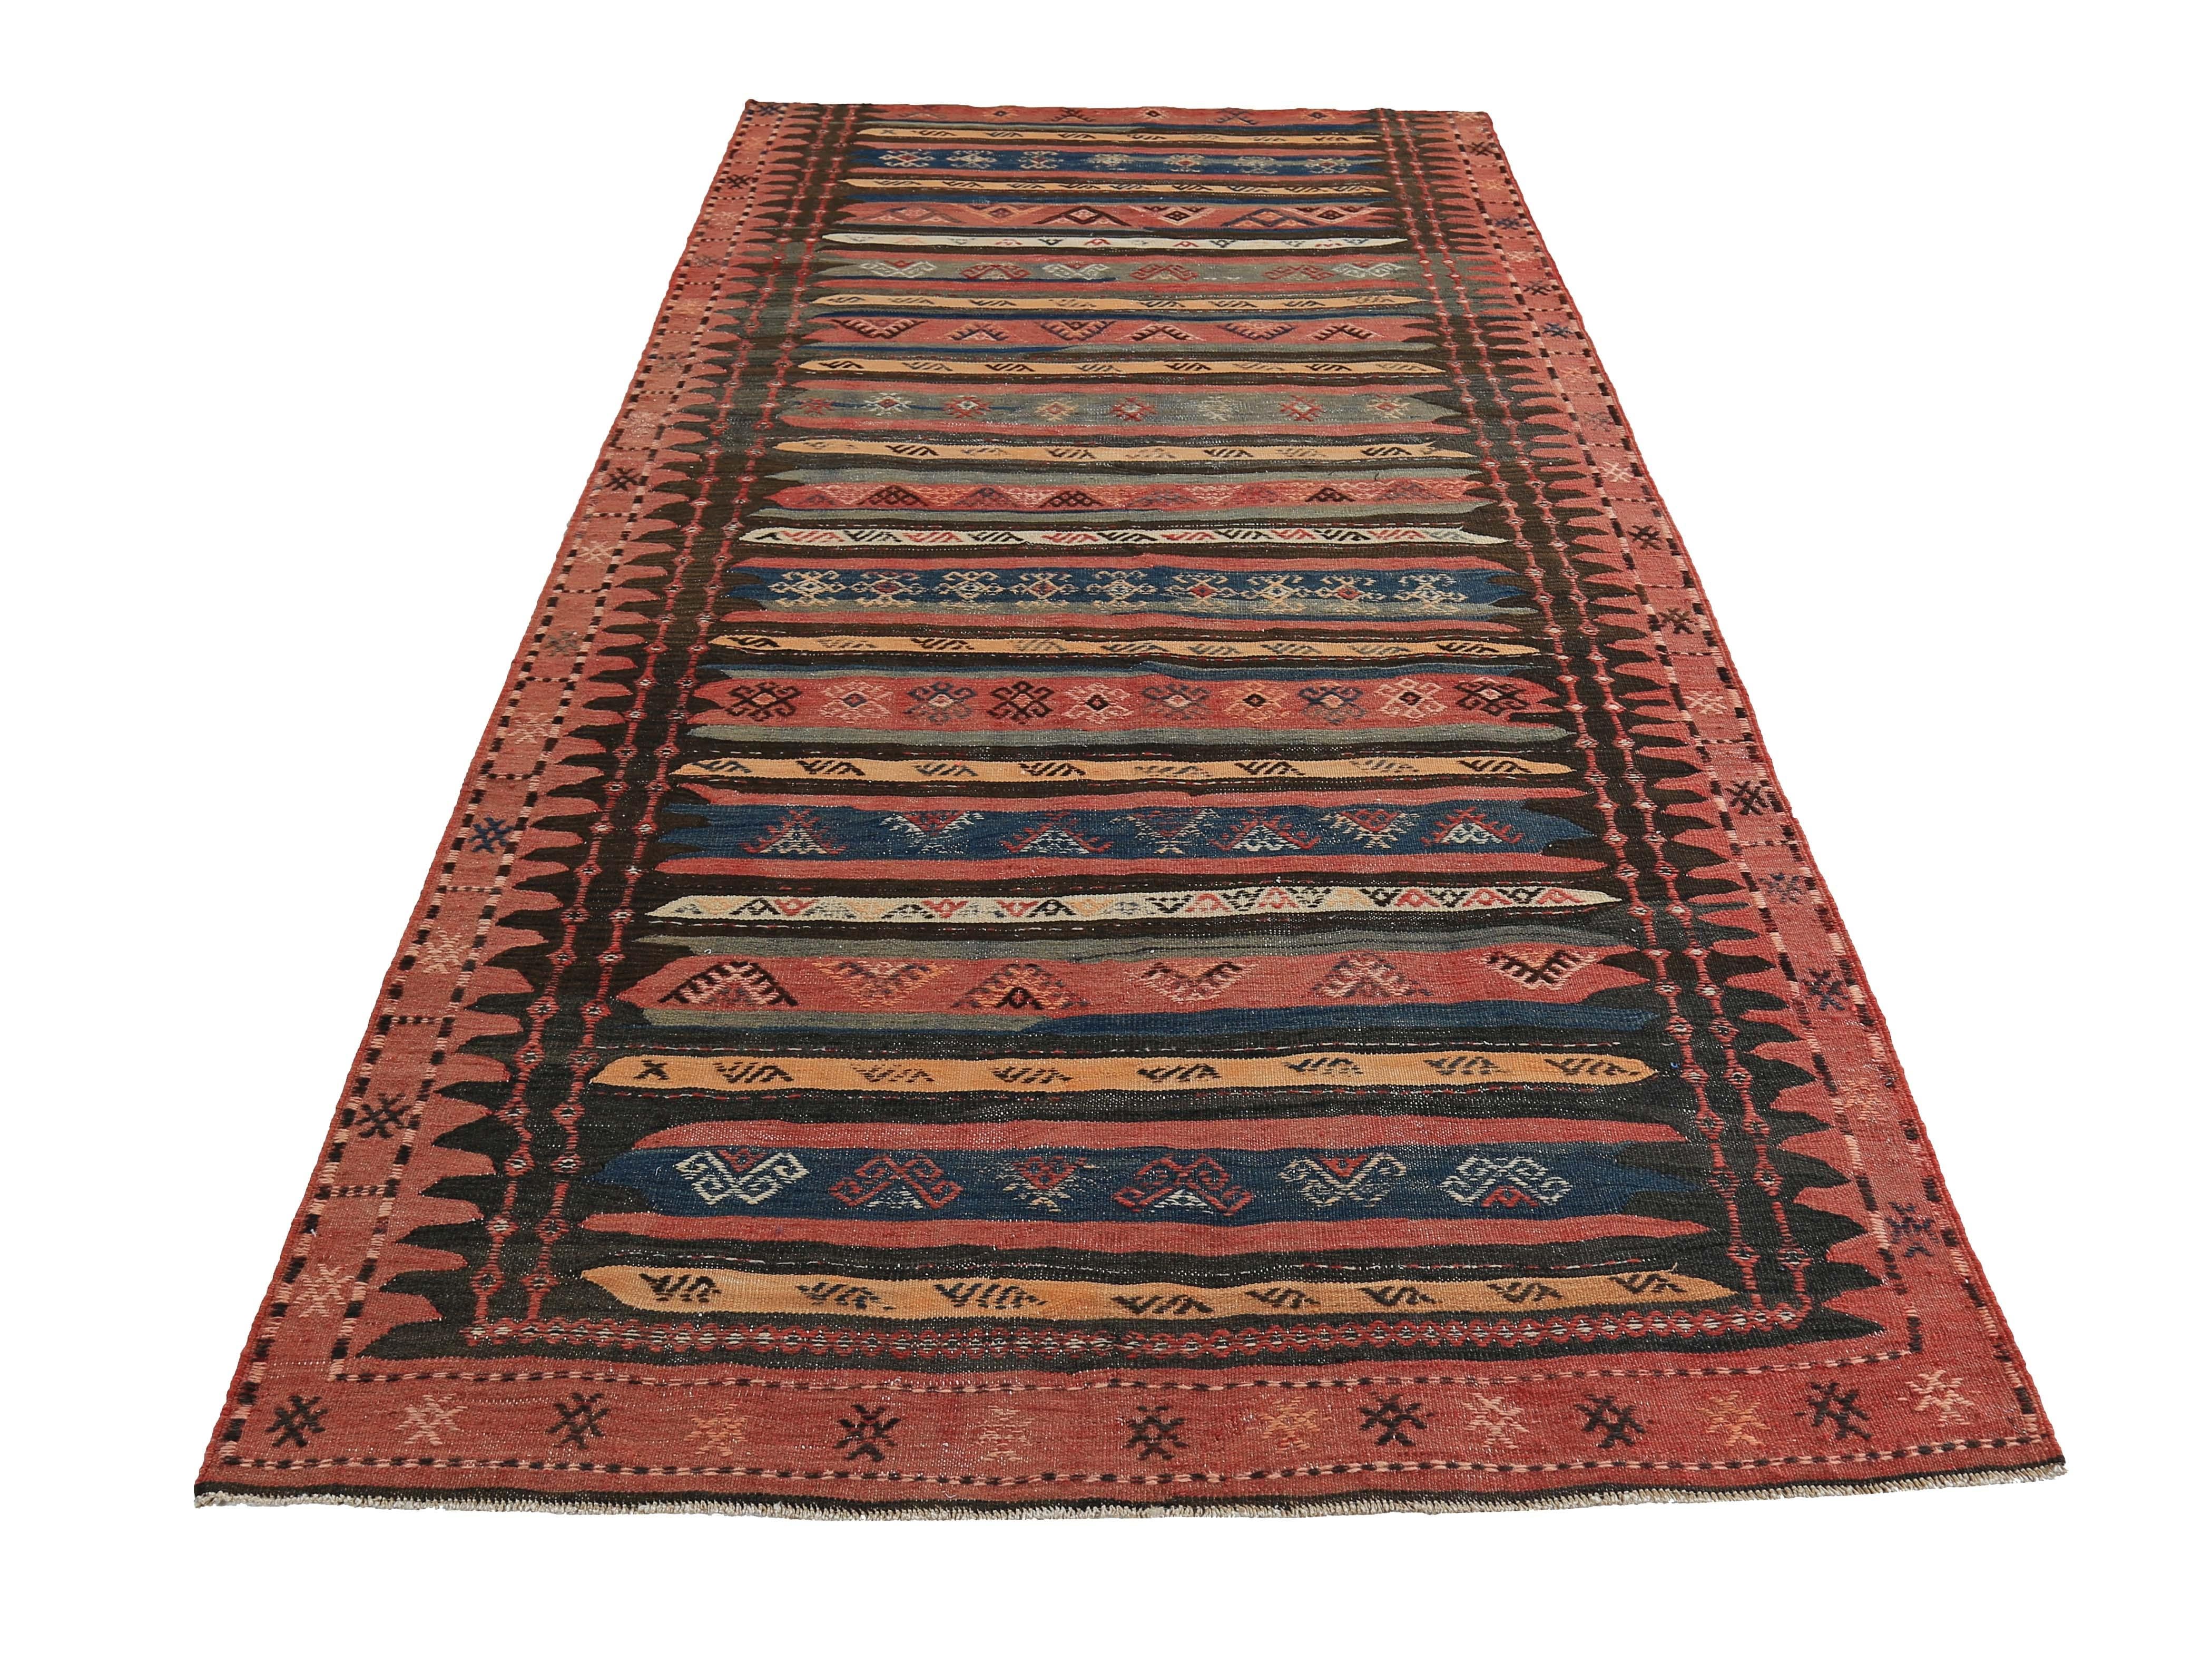 Turkish rug handwoven from the finest sheep’s wool and colored with all-natural vegetable dyes that are safe for humans and pets. It’s a traditional Kilim flat-weave design featuring red, orange and brown tribal stripes. It’s a stunning piece to get